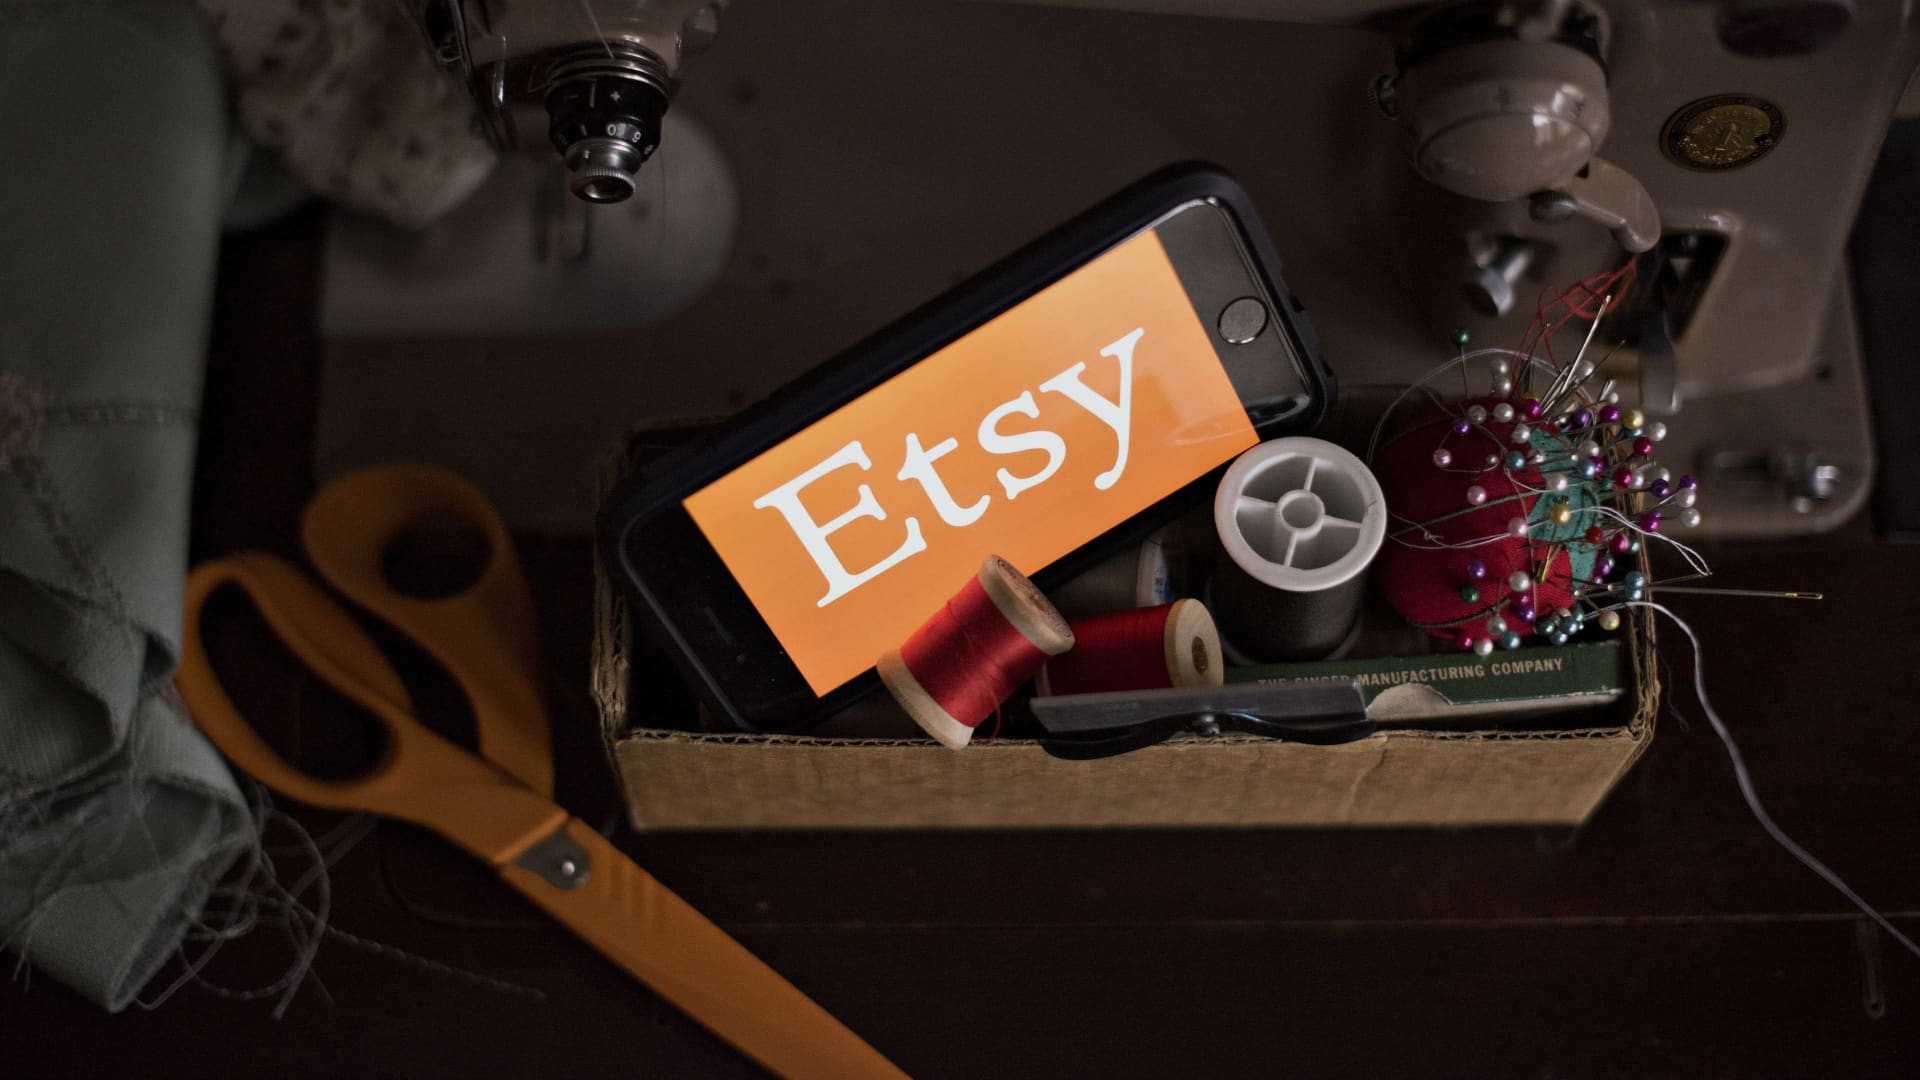 Etsy is trying to recreate pandemic-era sales. Here’s how [Video]